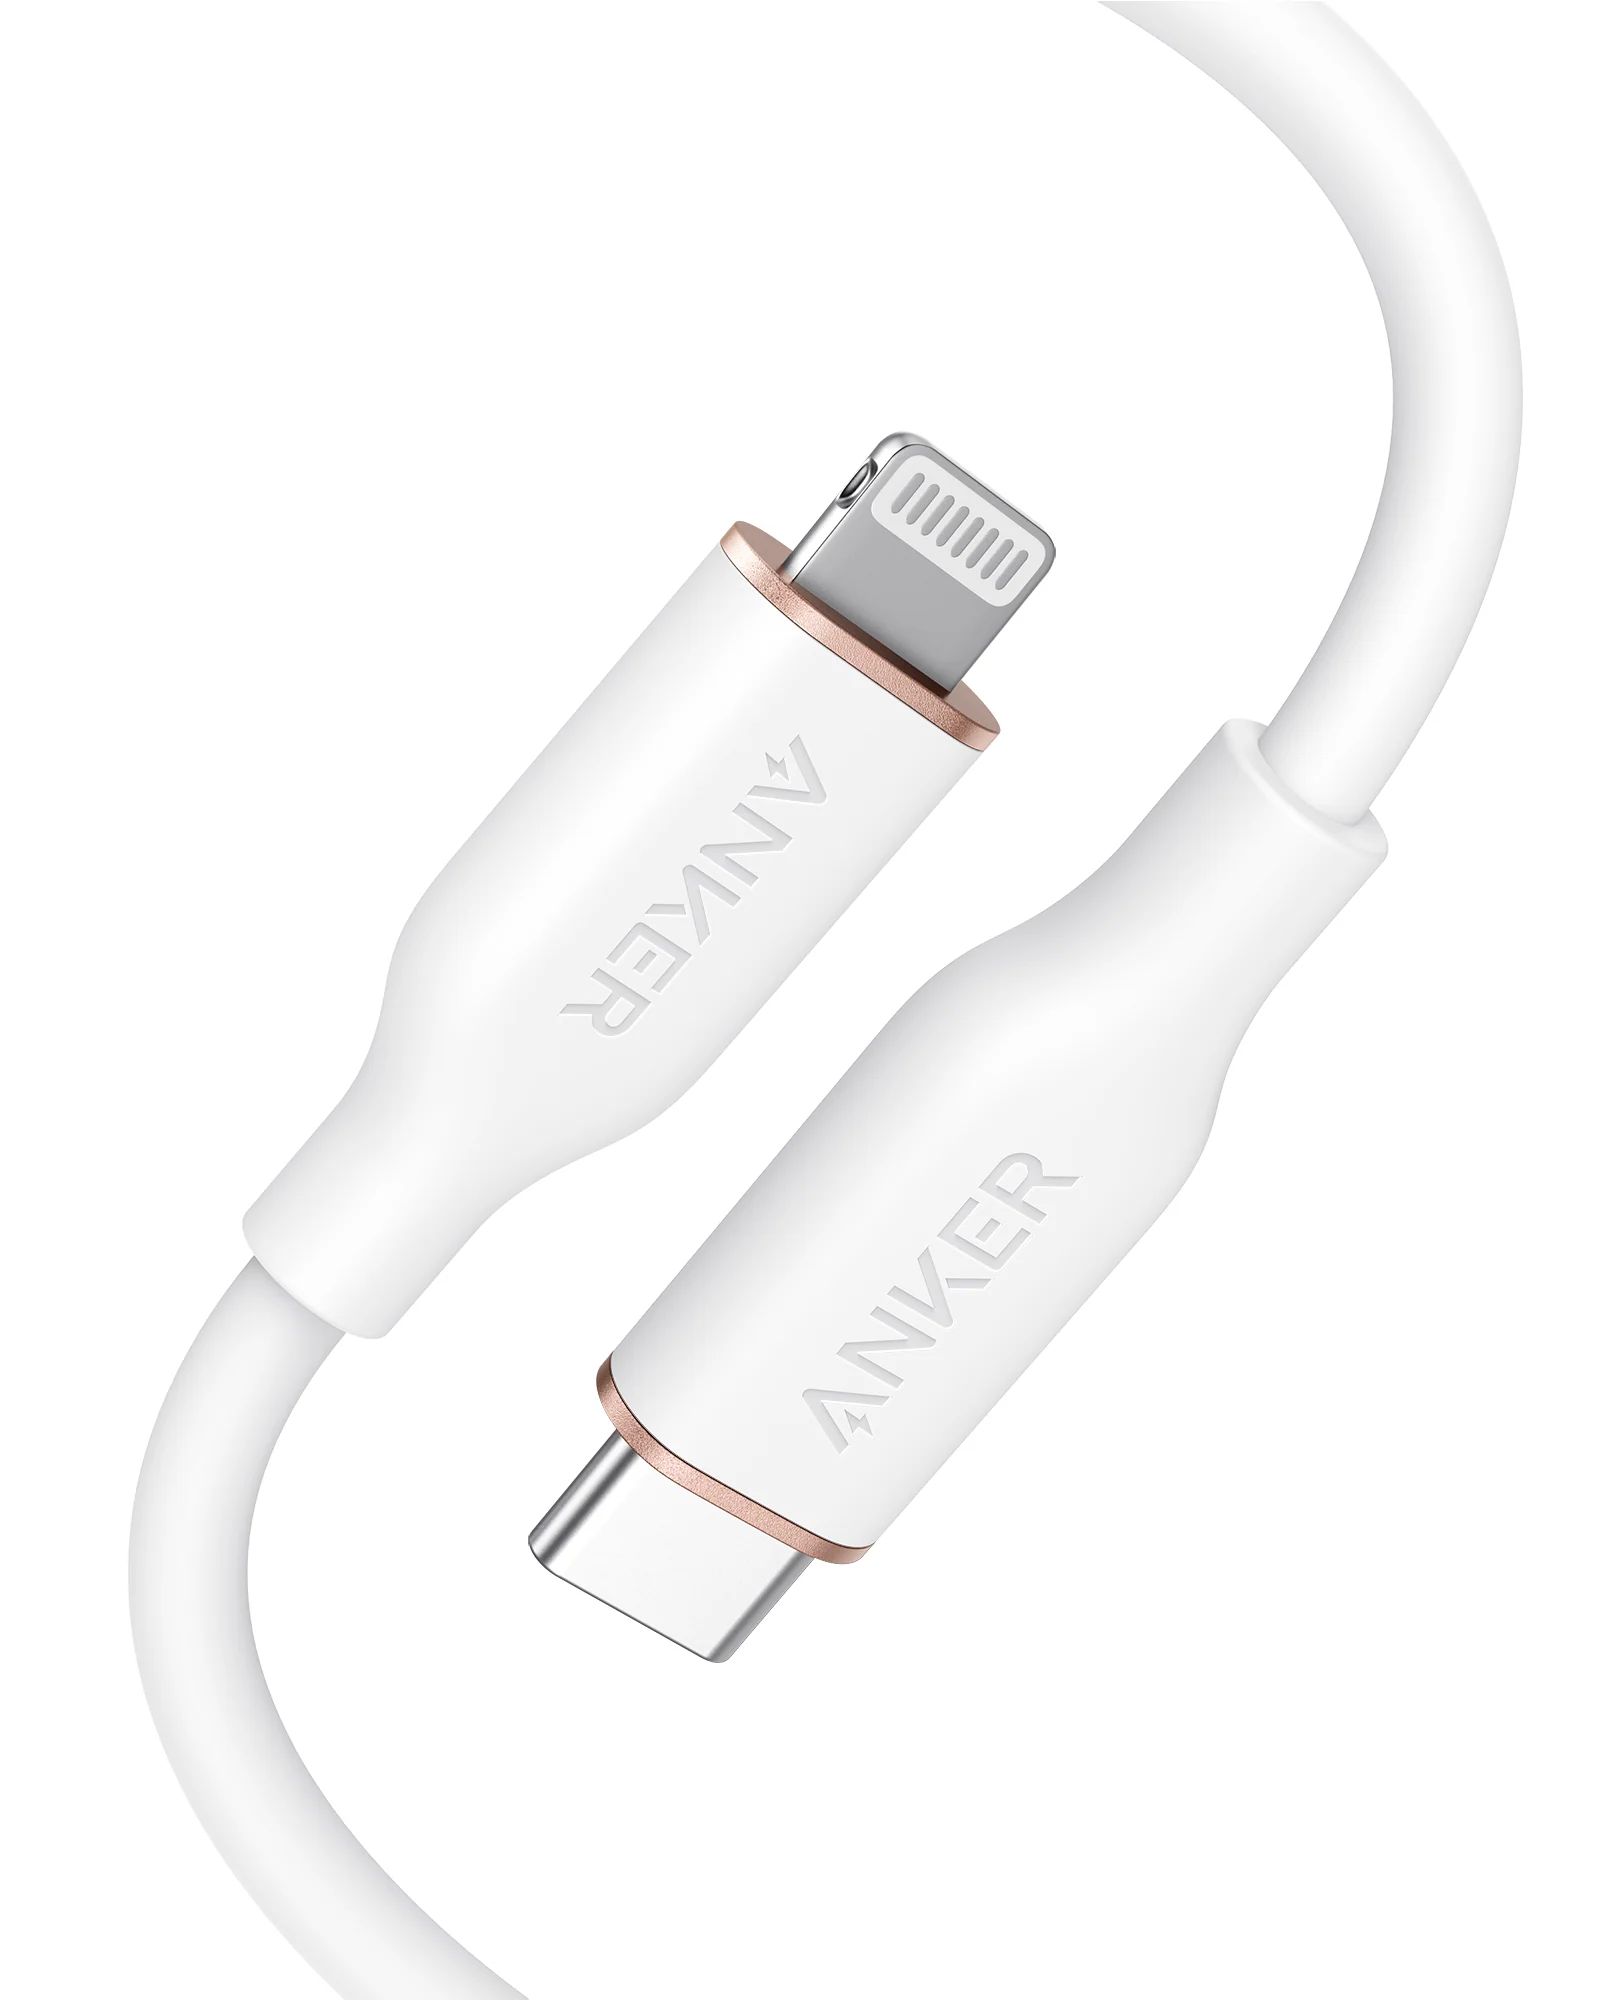 Anker 641 USB-C to Lightning Cable (Flow, 3ft Silicone) | Anker Innovations Limited